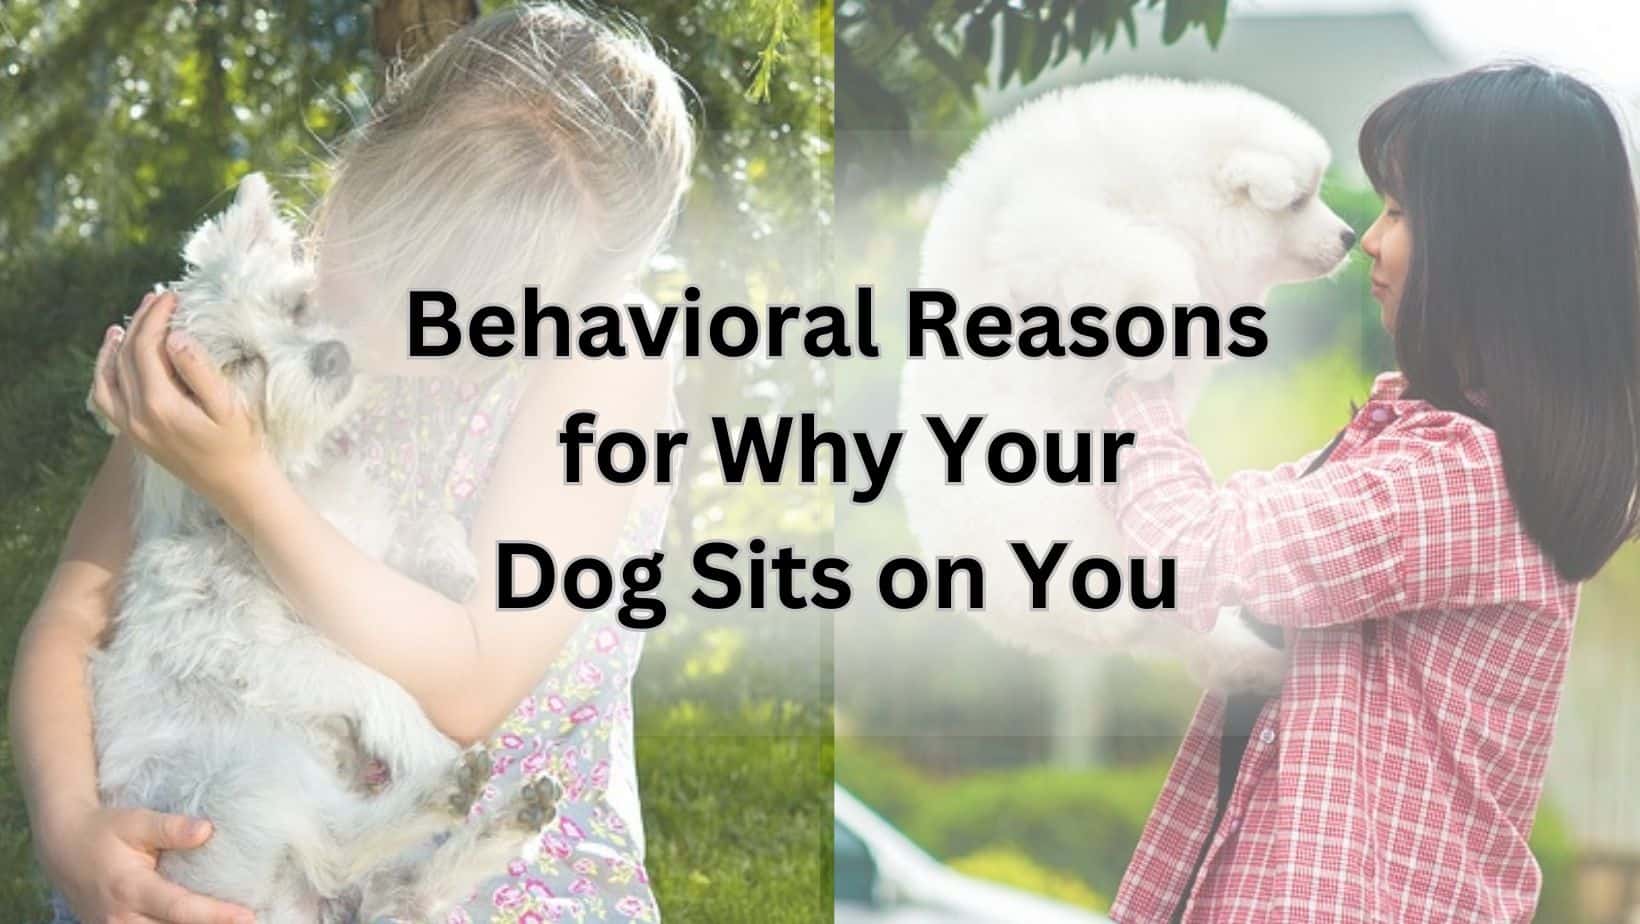 Behavioral Reasons for Why Your Dog Sits on You